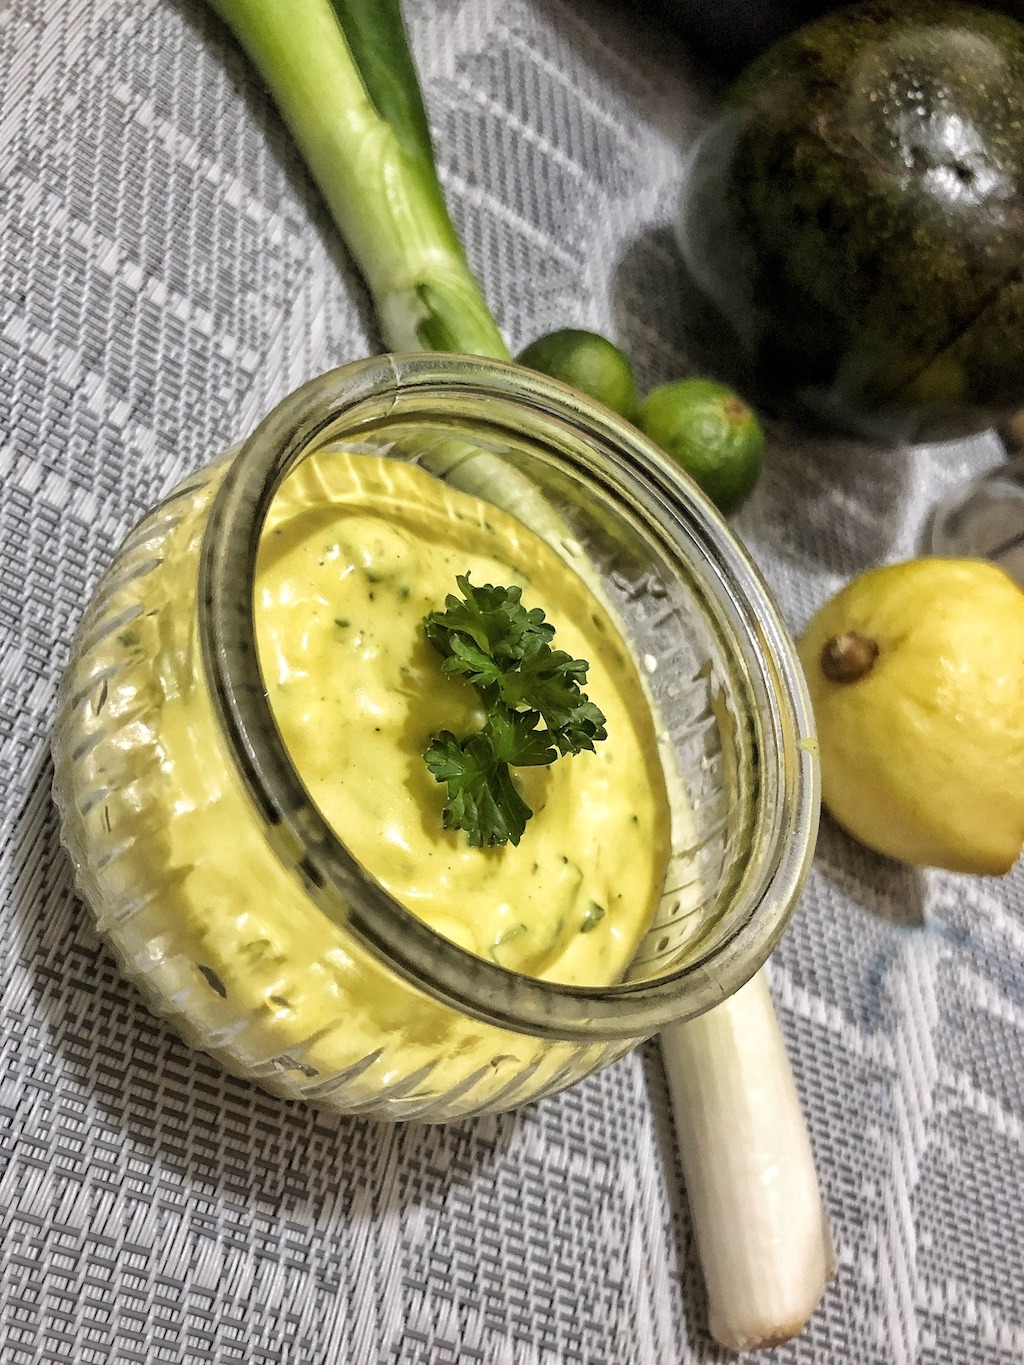 Easy Recipe Creamy Mustard BBQ Sauce For Fish Beef Or Chicken - Healthy Keto Sugar Free Low Carb